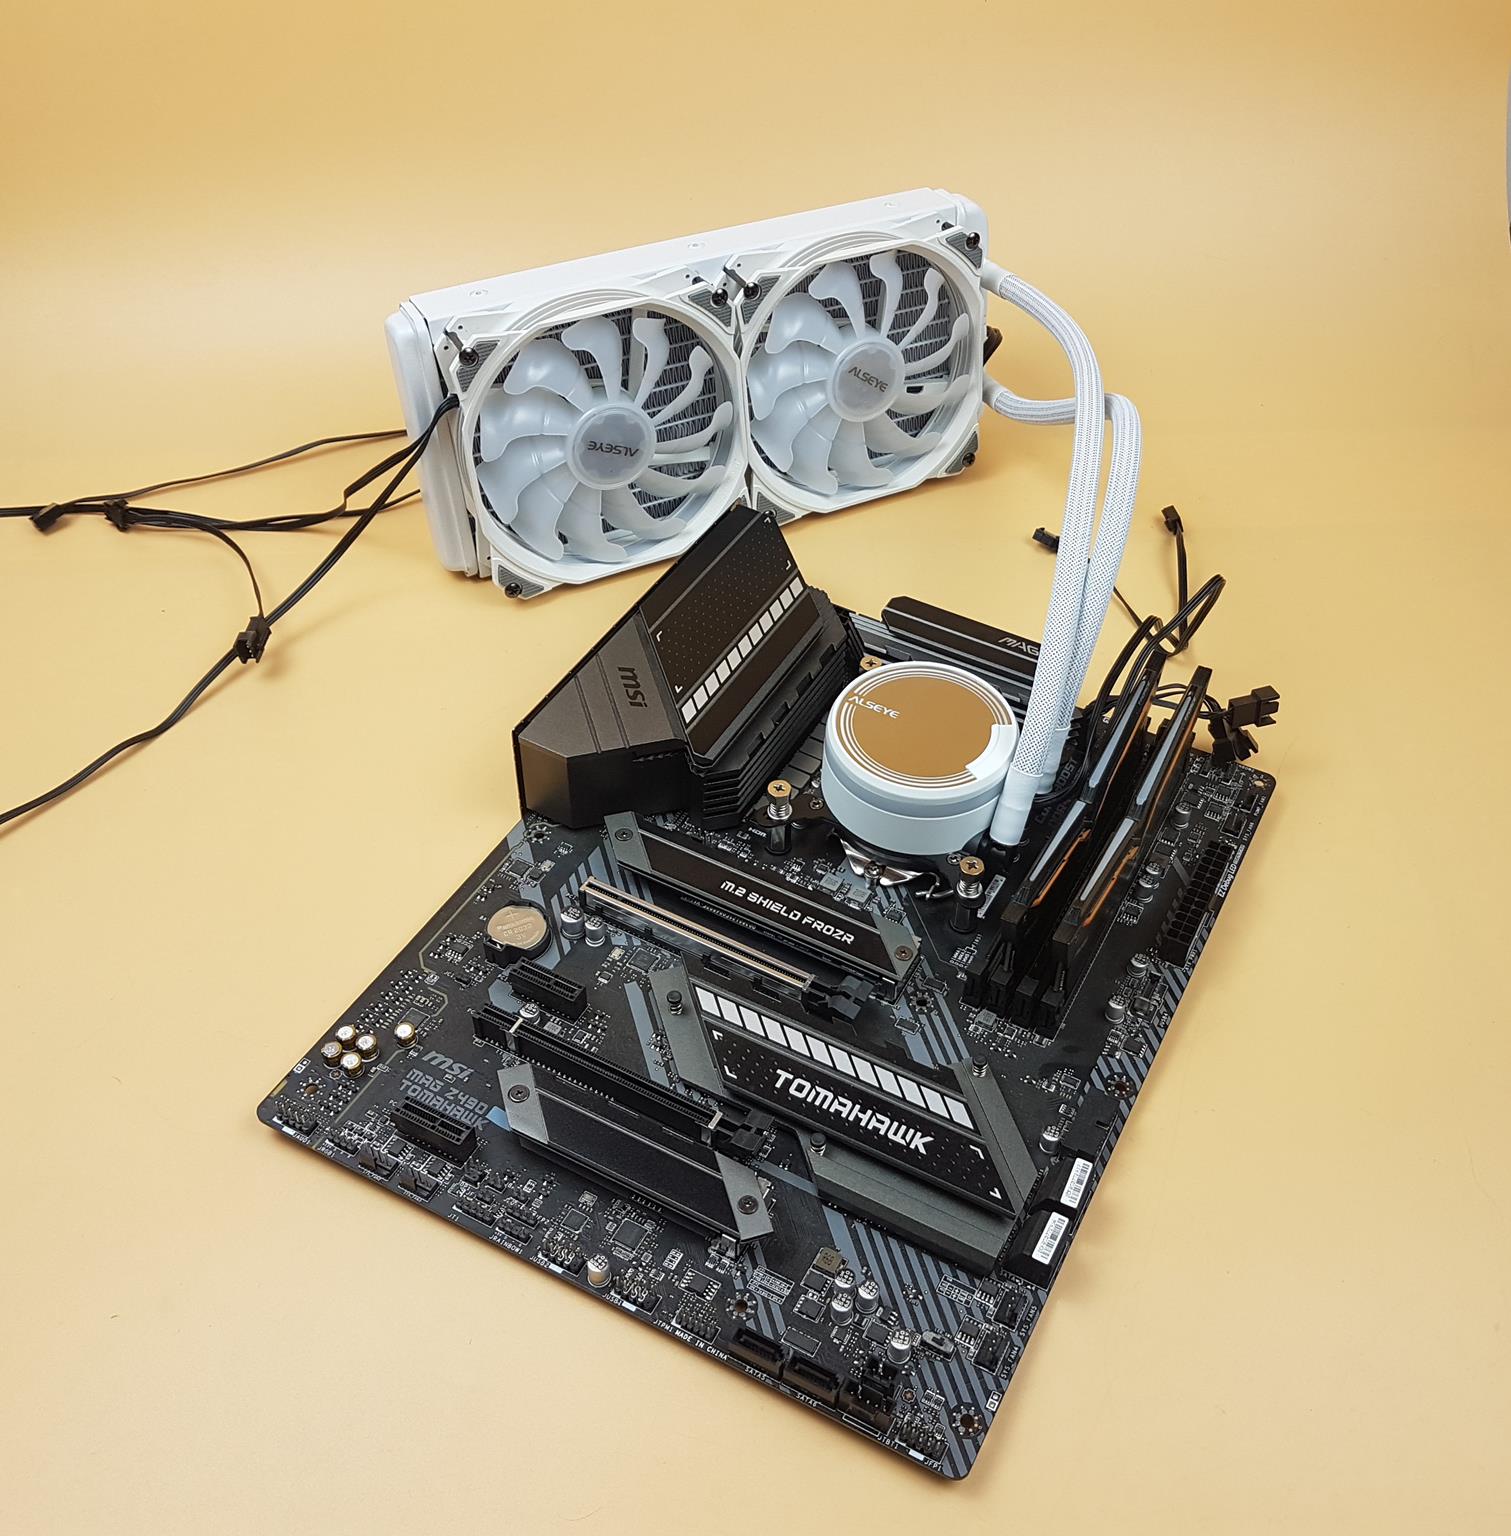 ALSEYE M240 White Cooler Review